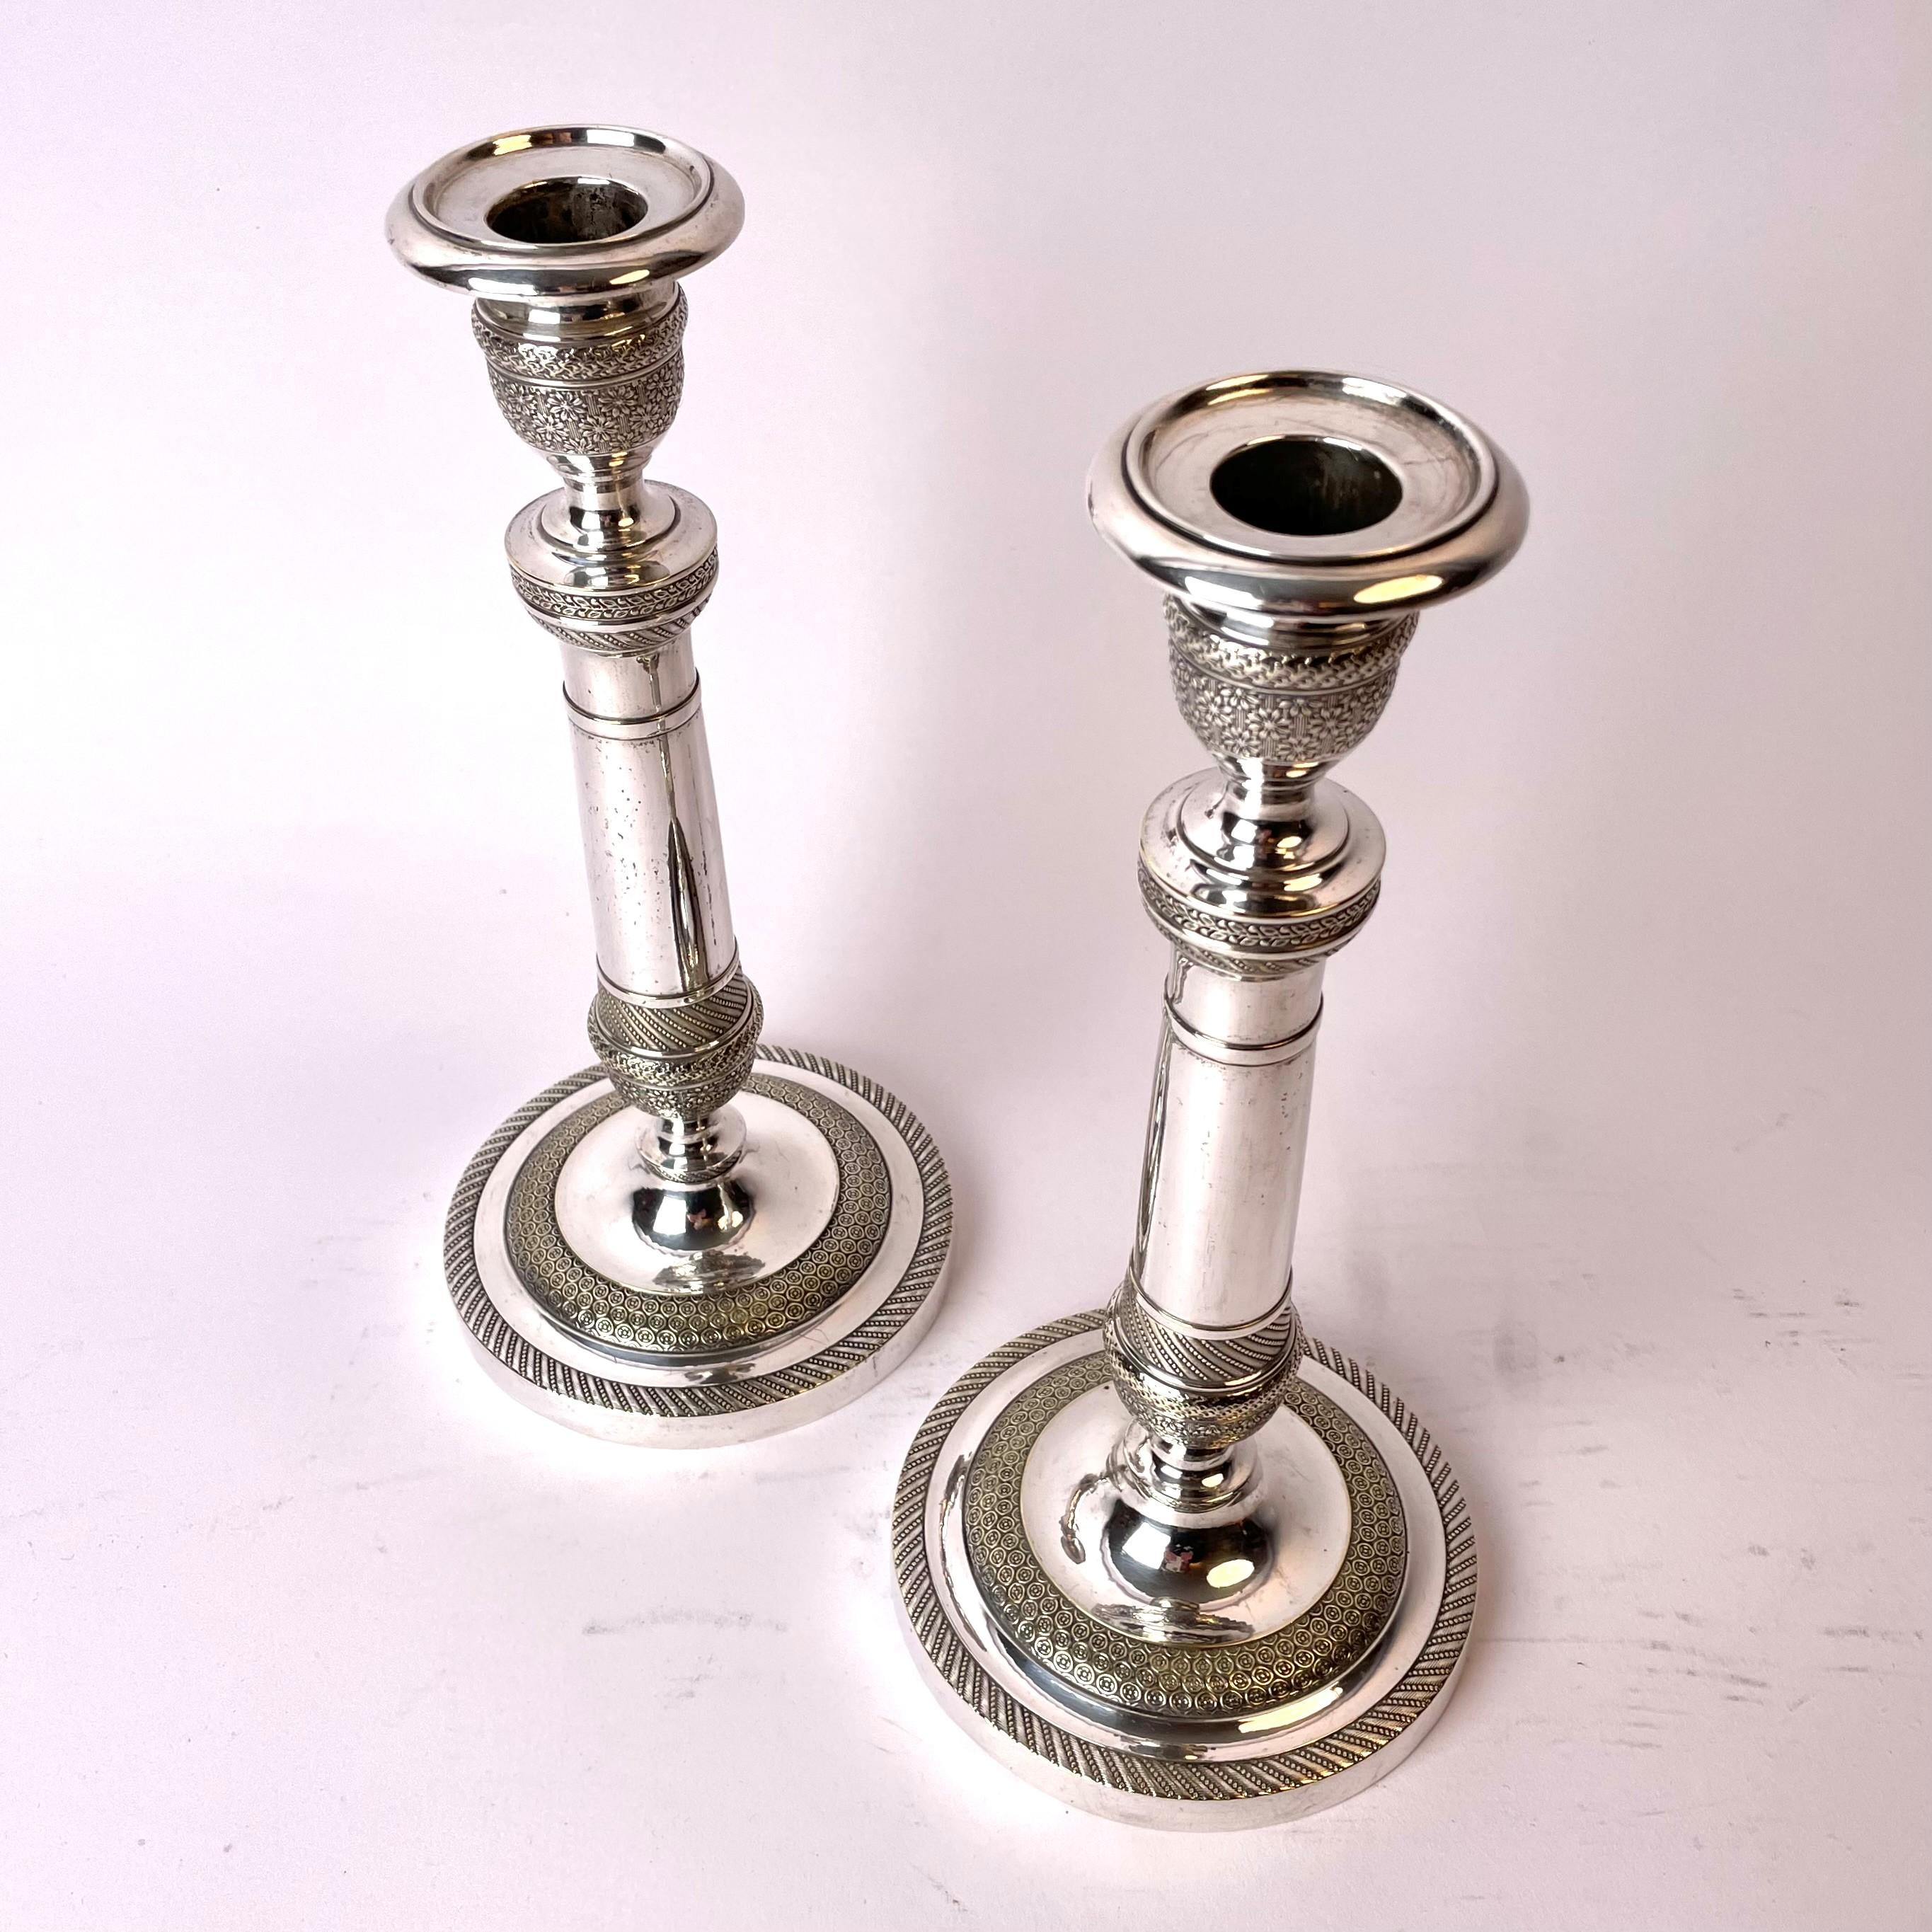 Empire An Elegant pair of empire candlesticks in Argent haché